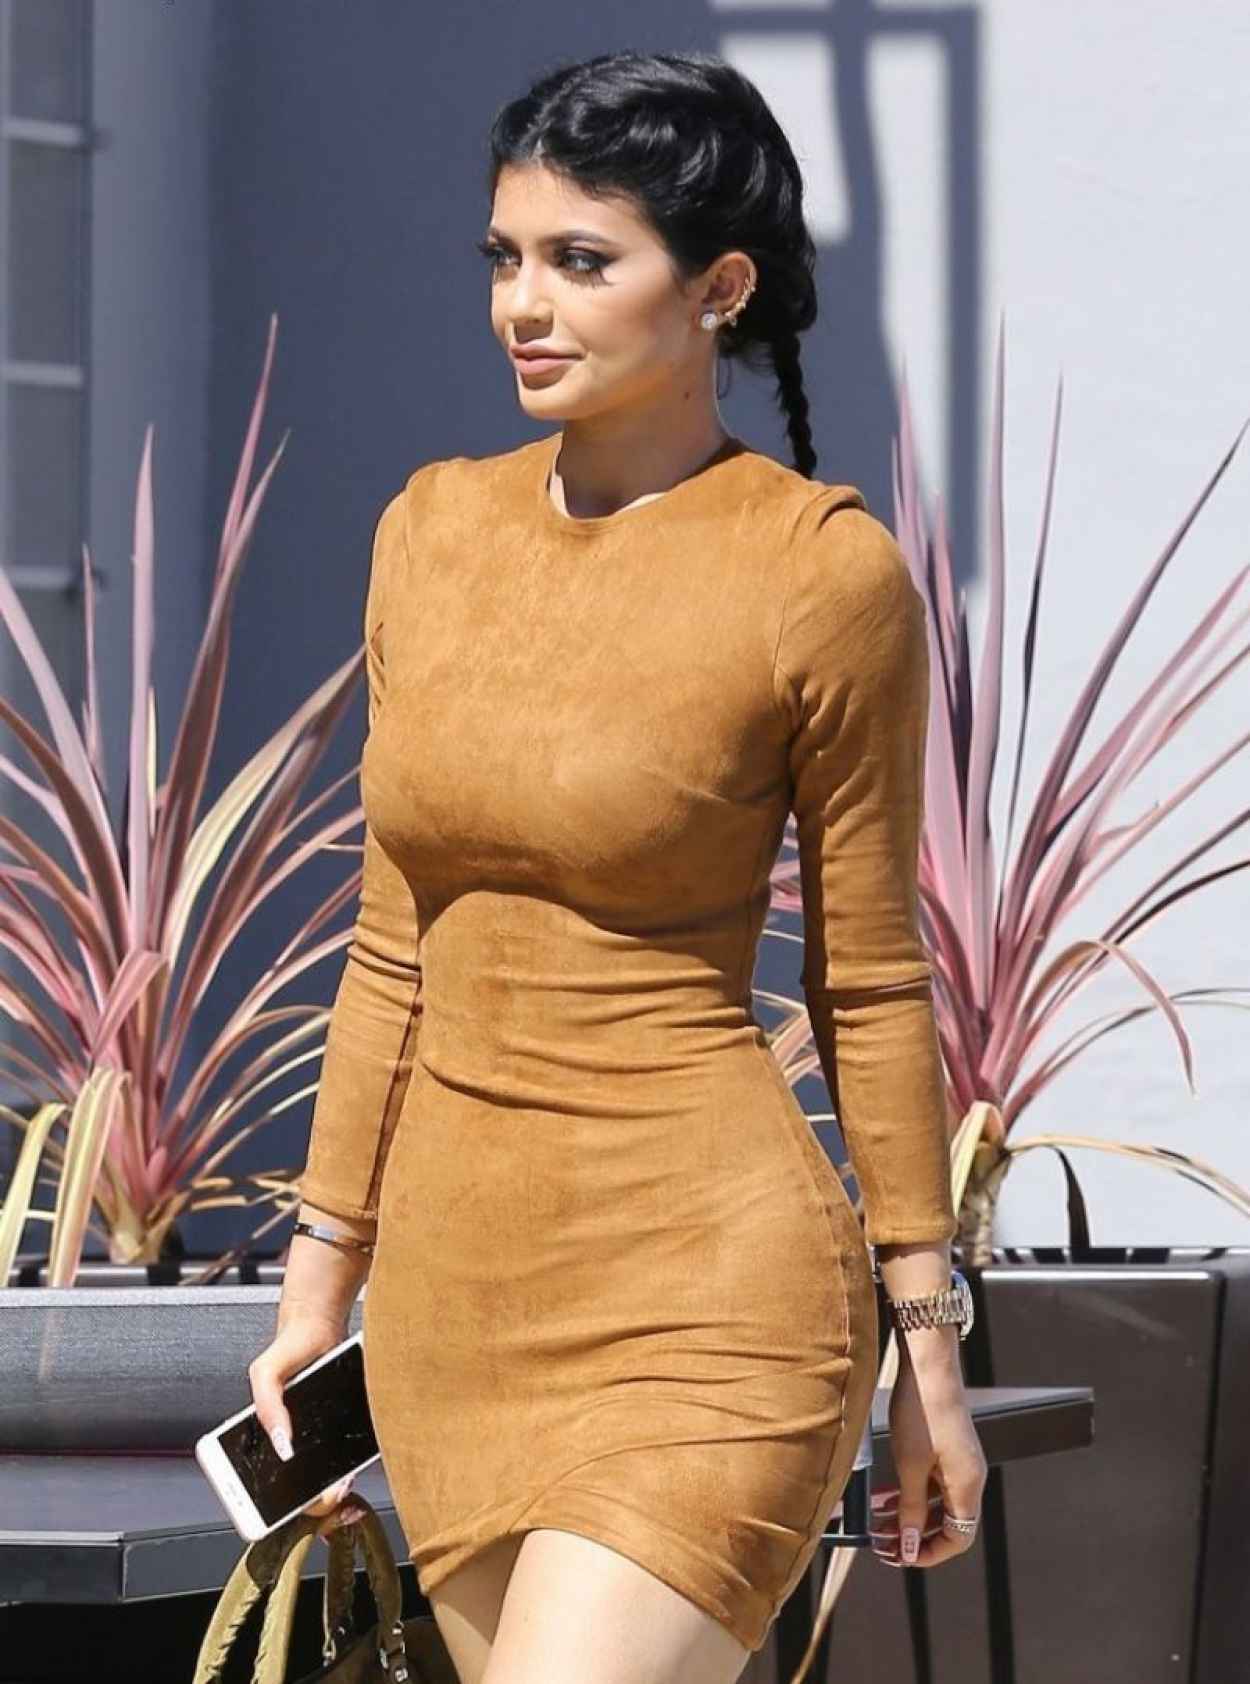 Kylie Jenner Flaunts Her Curves in Skin Tight Dress – Going to Smashbox ...